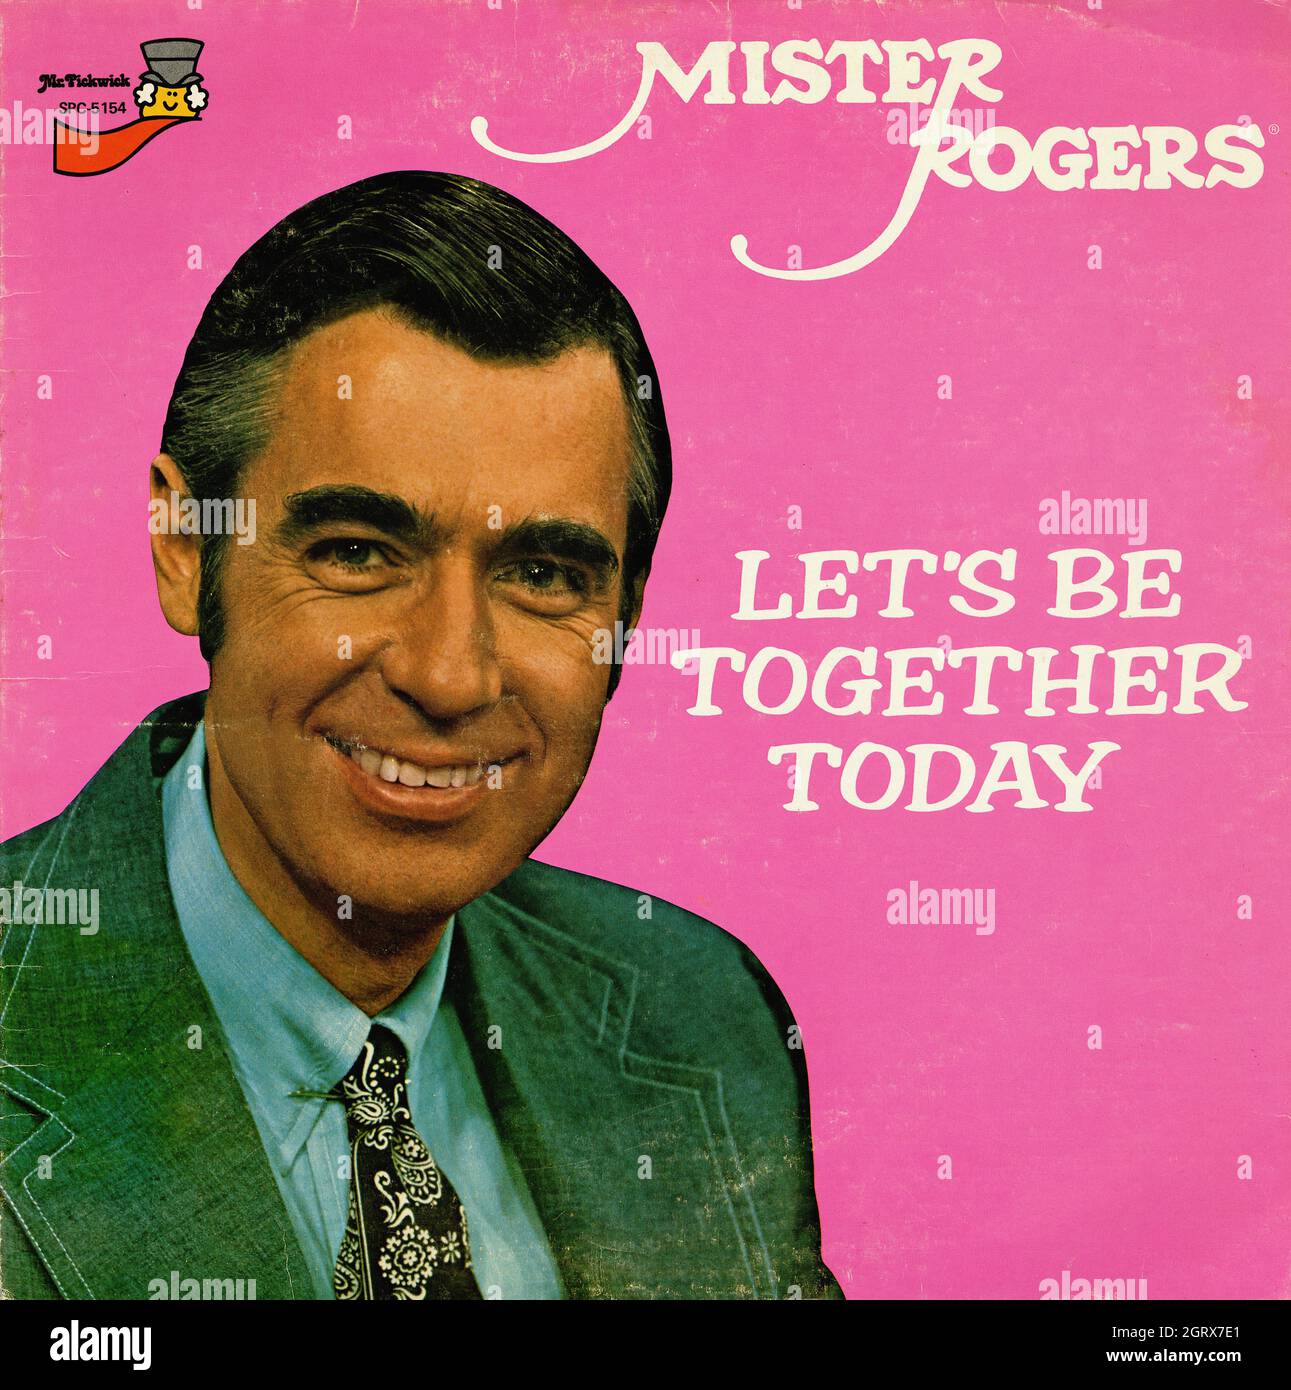 Mister Rogers - Let's Be Together Today - Vintage American Comedy Vinyl Album Foto Stock